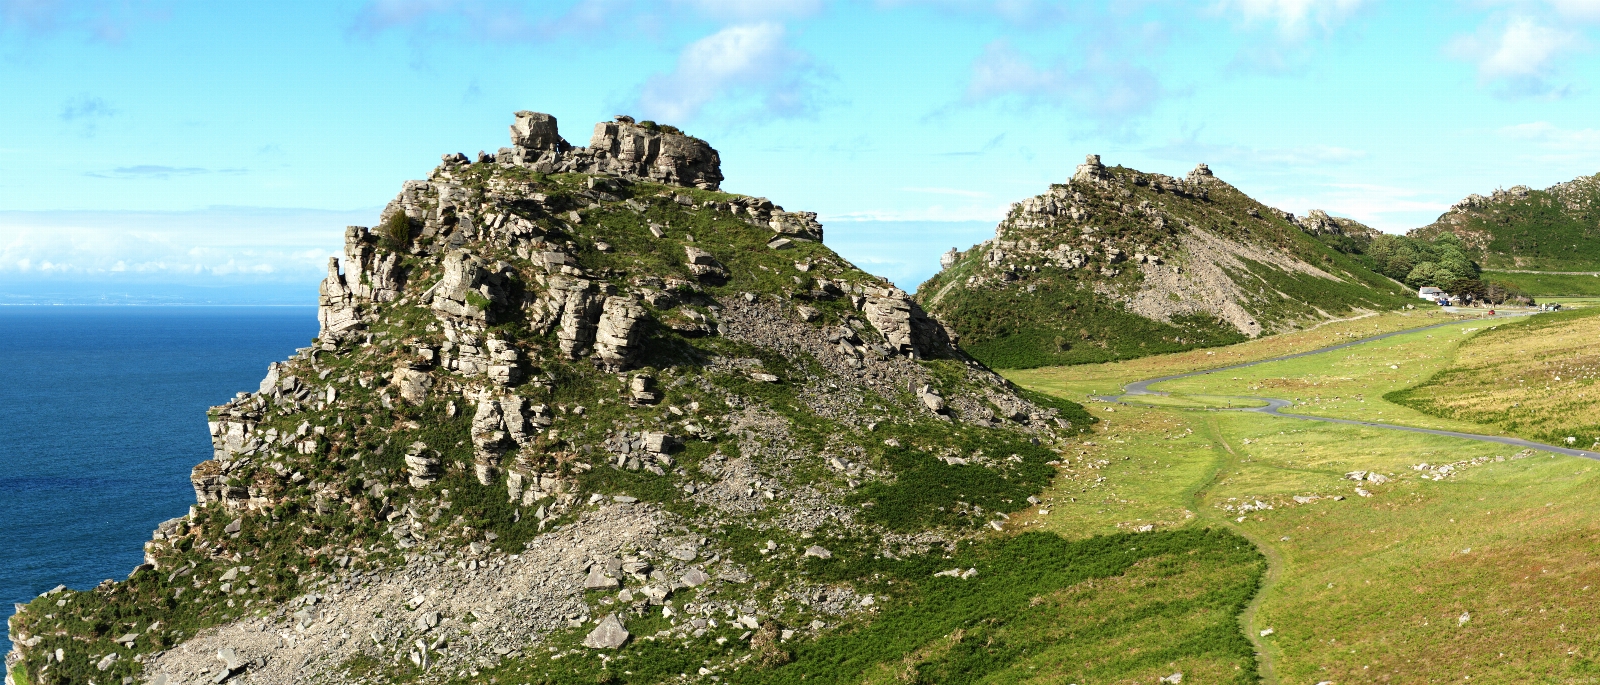 Image of Valley of Rocks by Nick Harborne